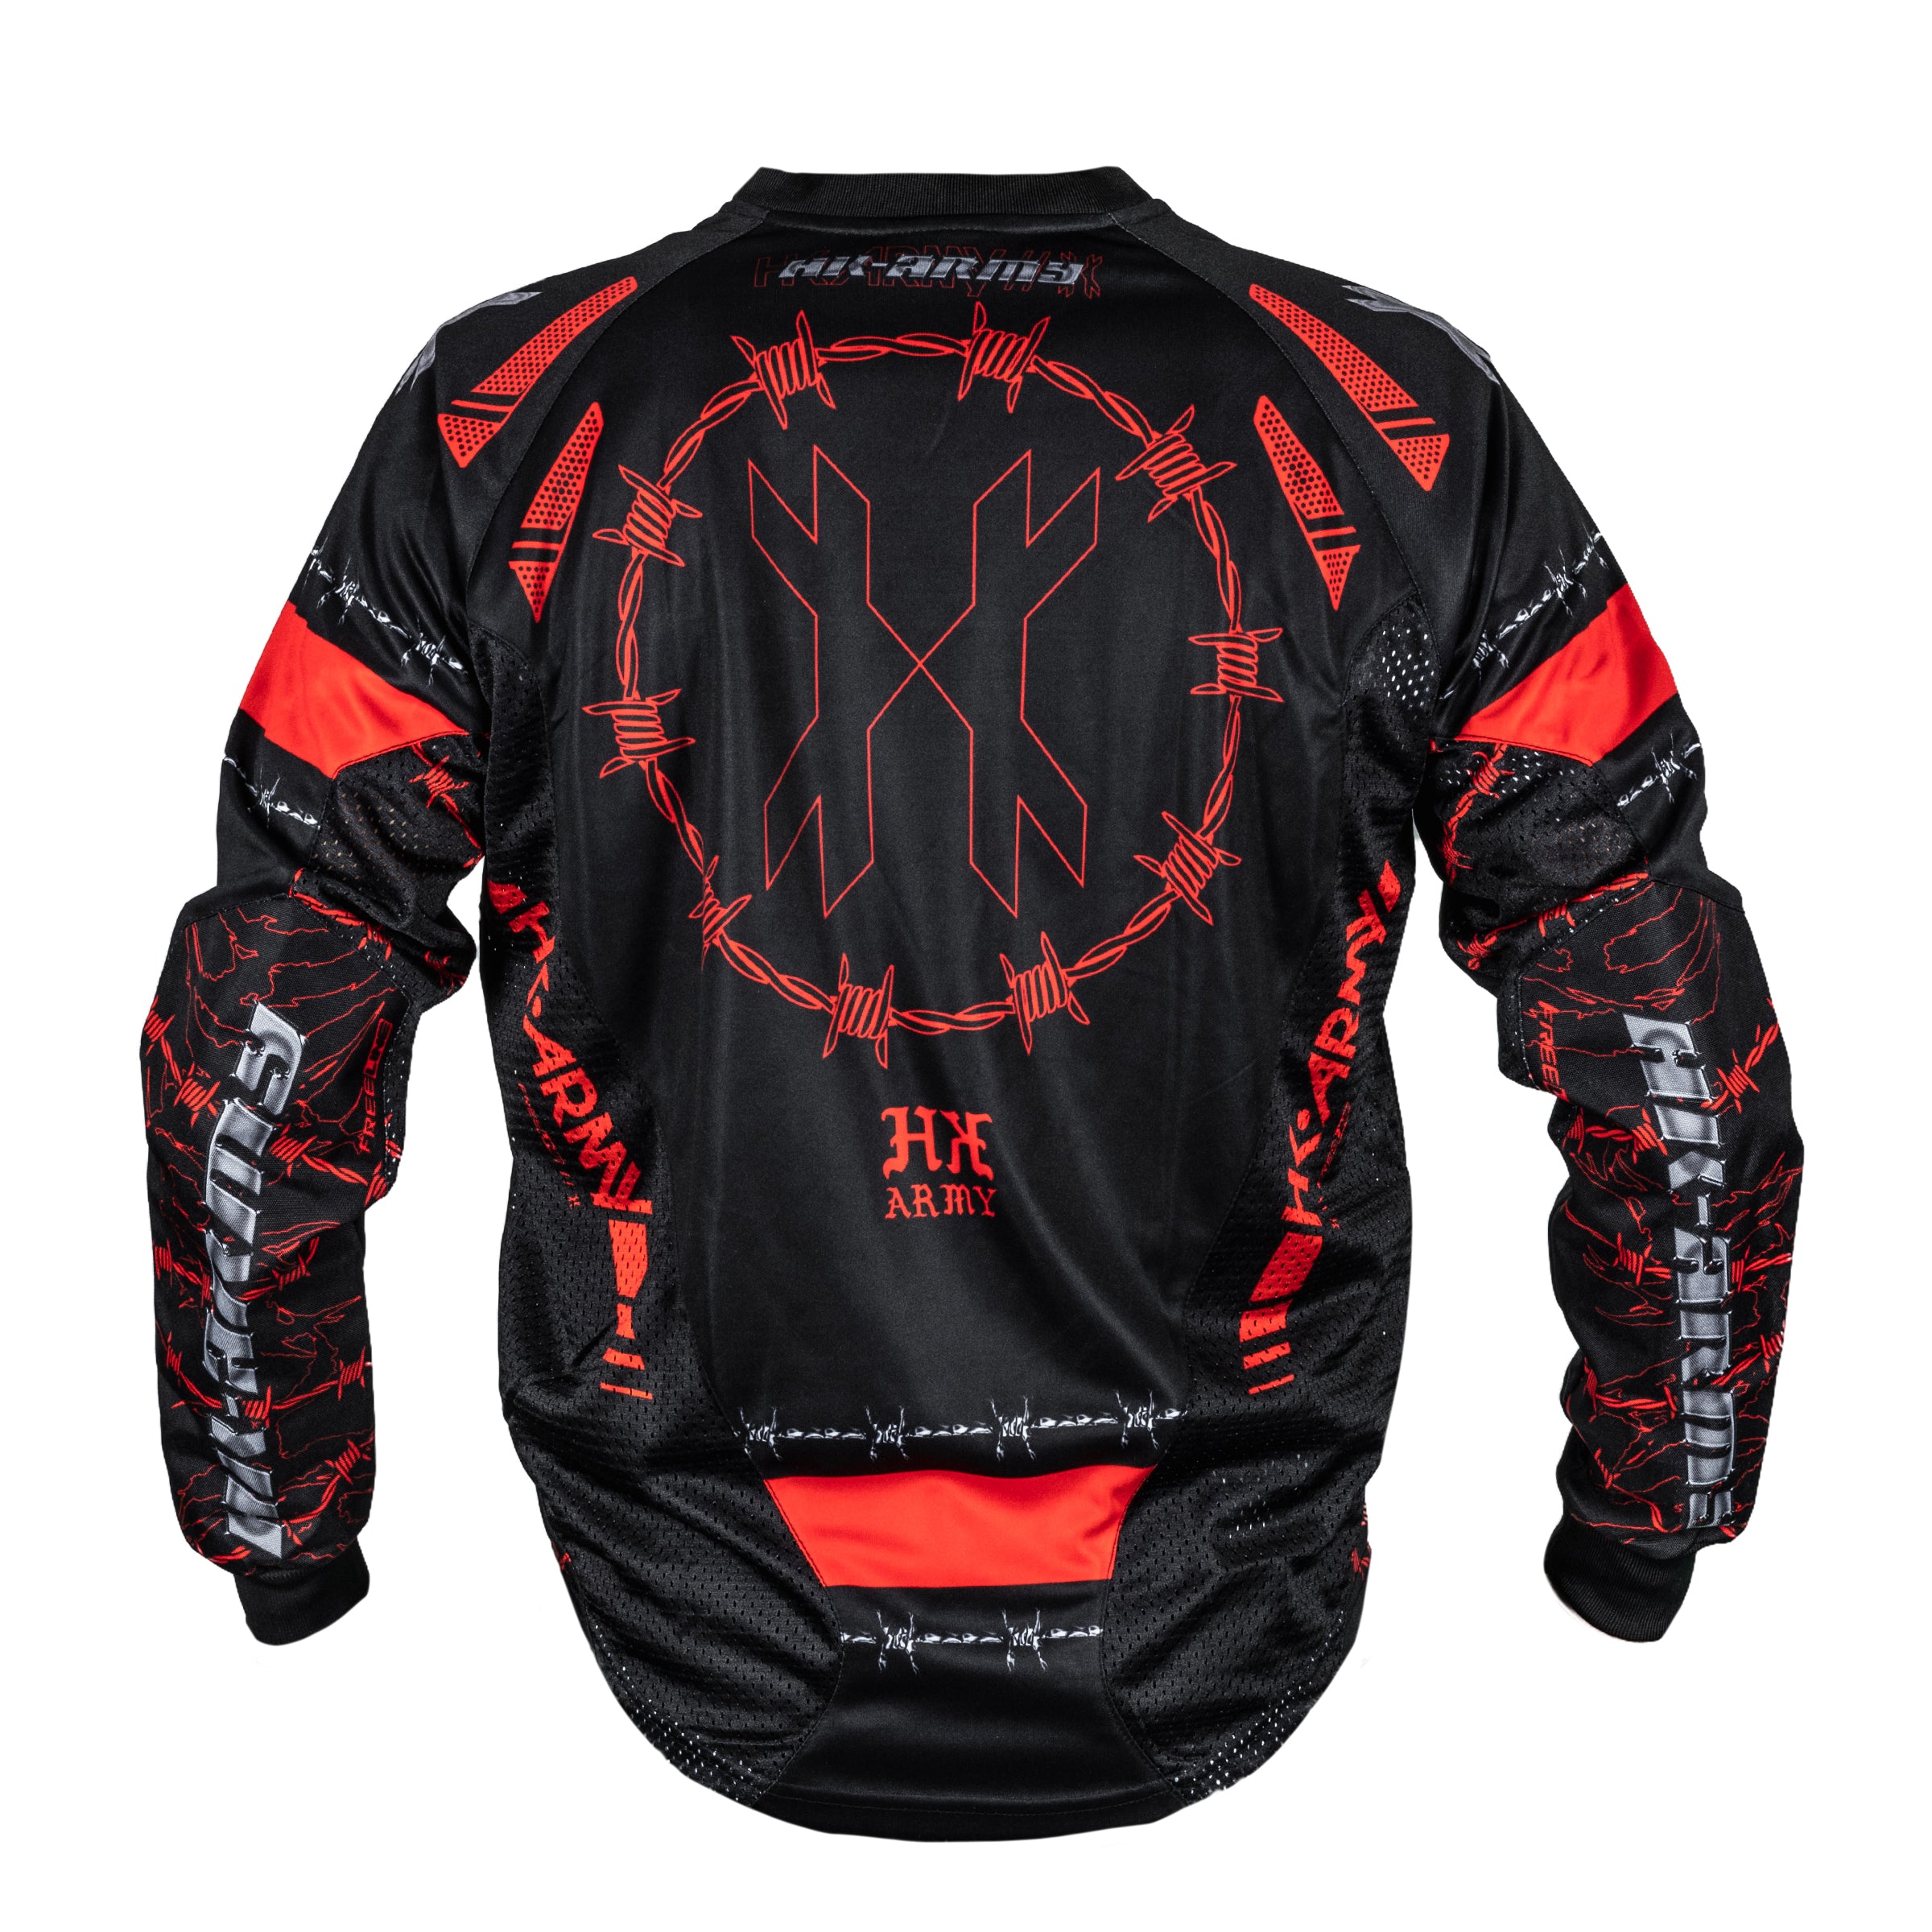 Wired Red/Black - Freeline Jersey | HK Army Paintball